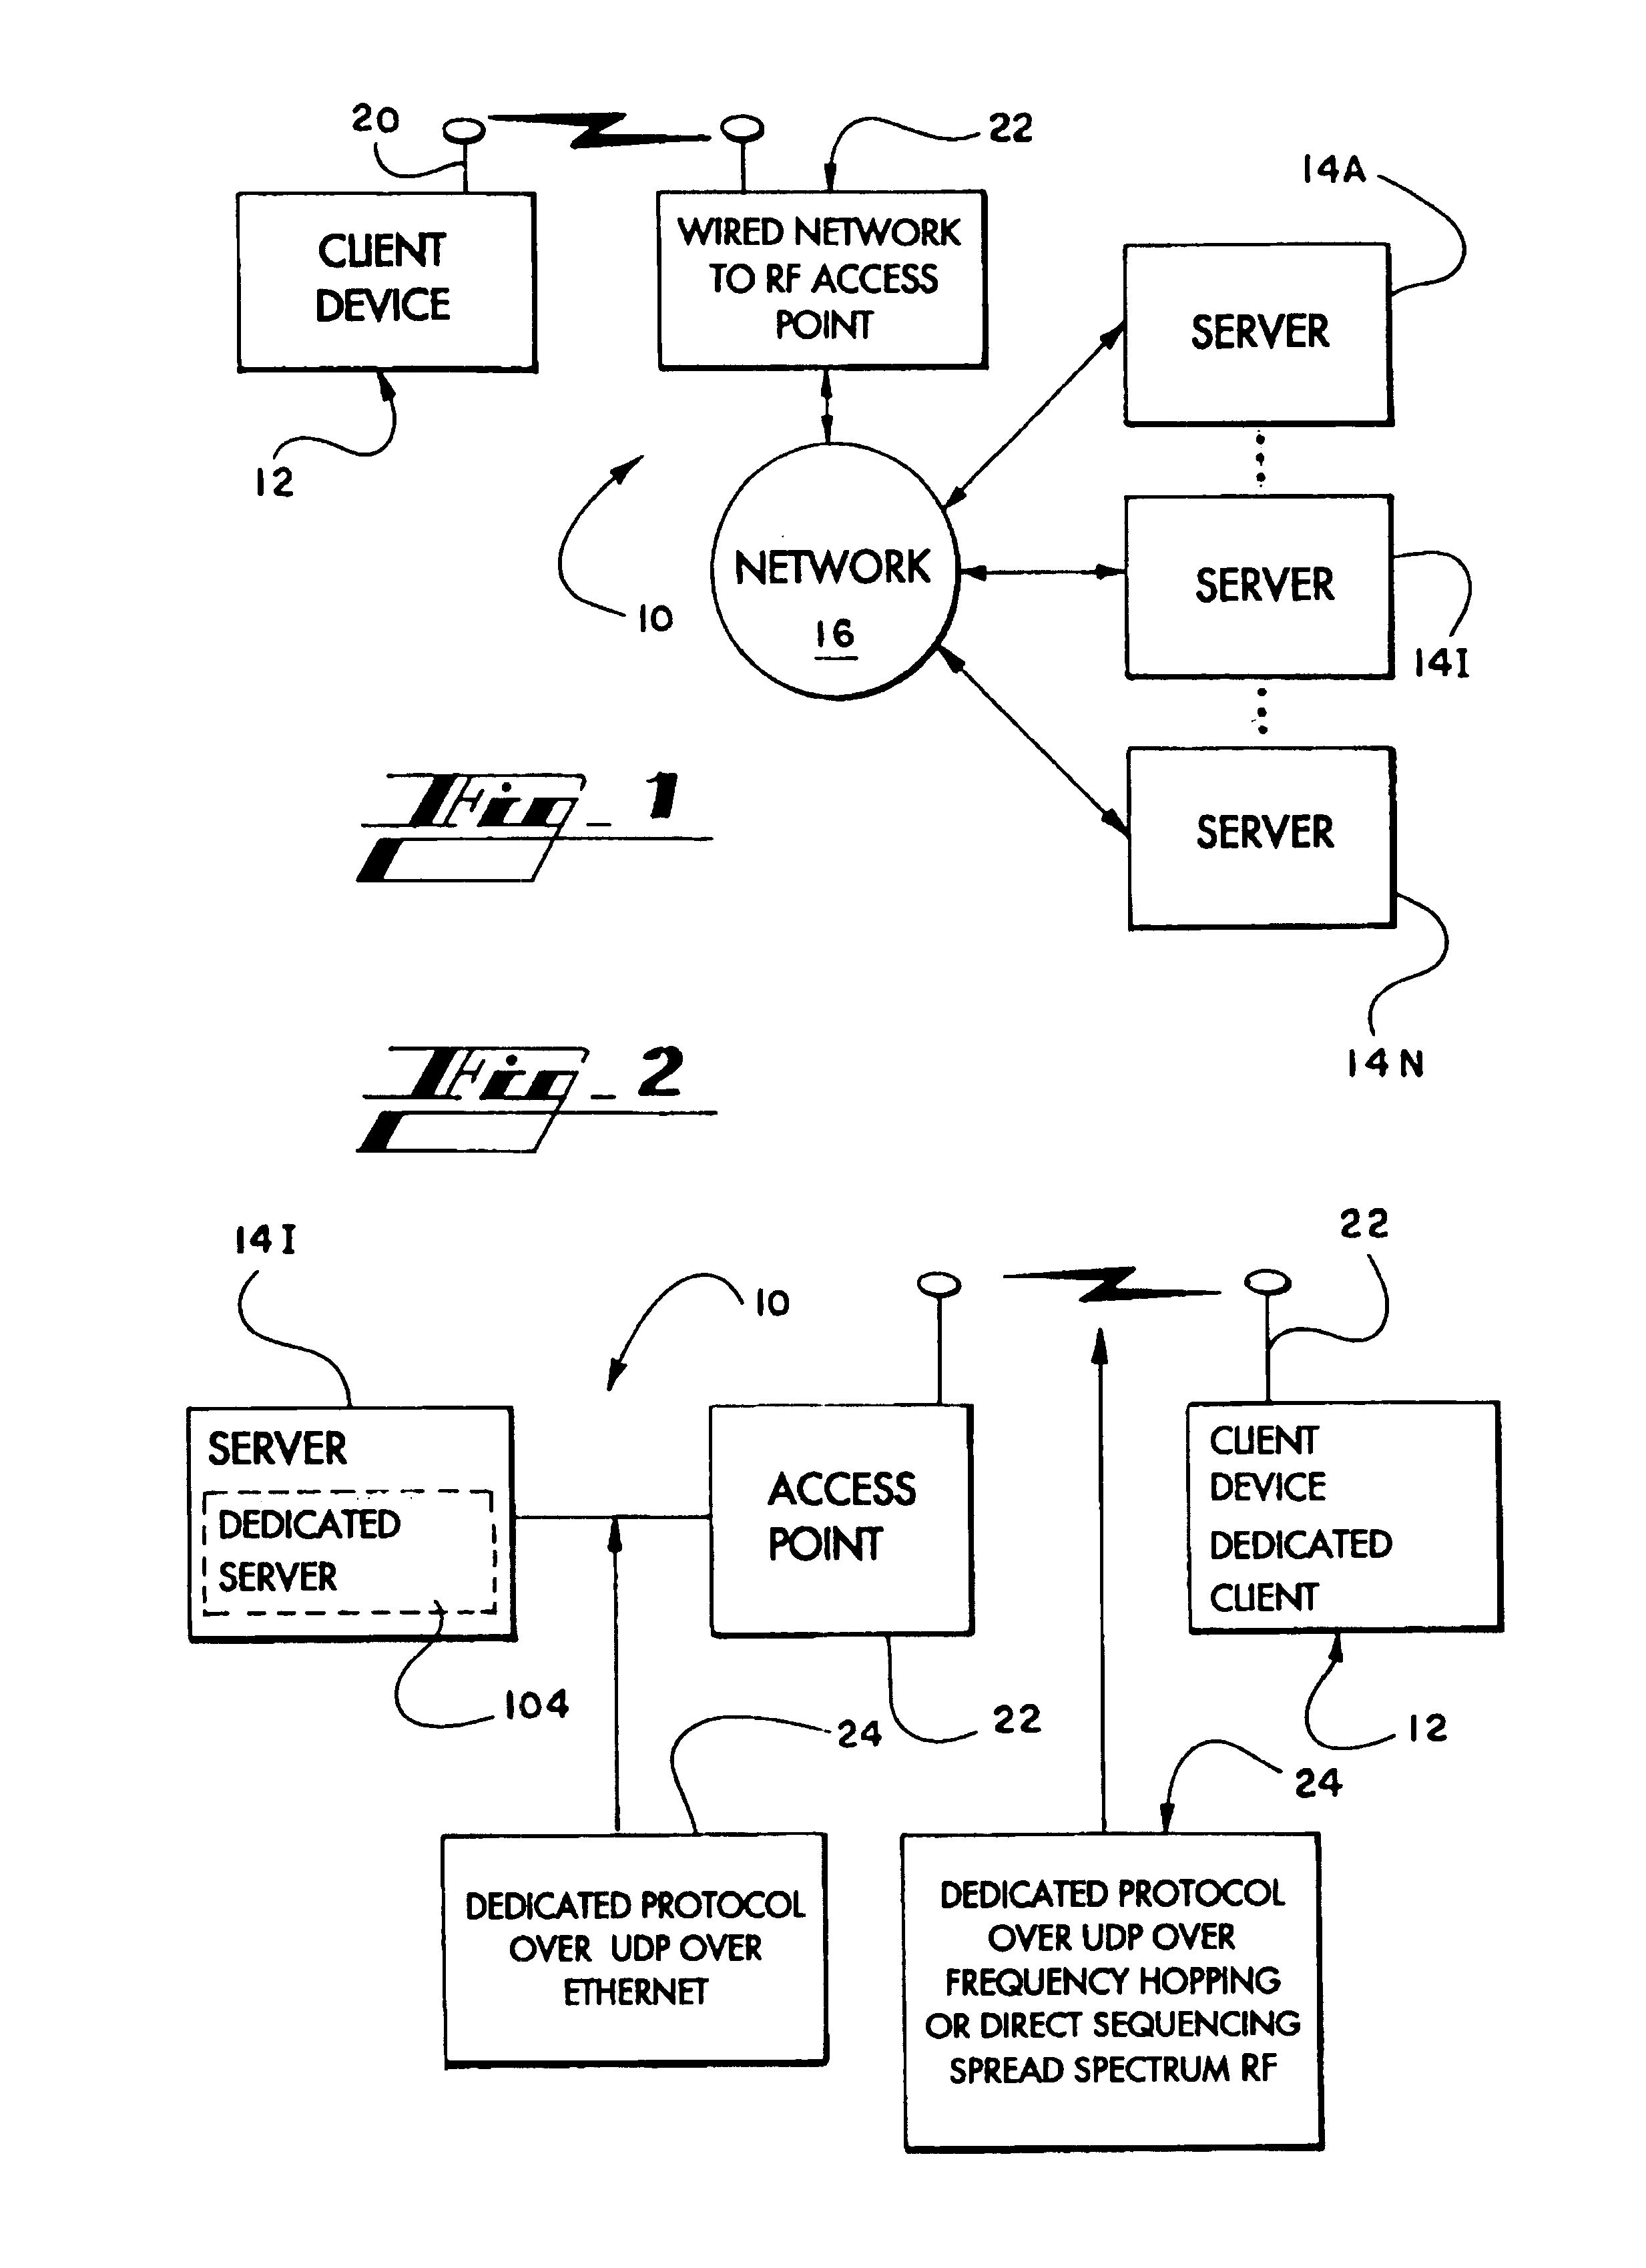 Method and apparatus allowing a limited client device to use the full resources of a networked server